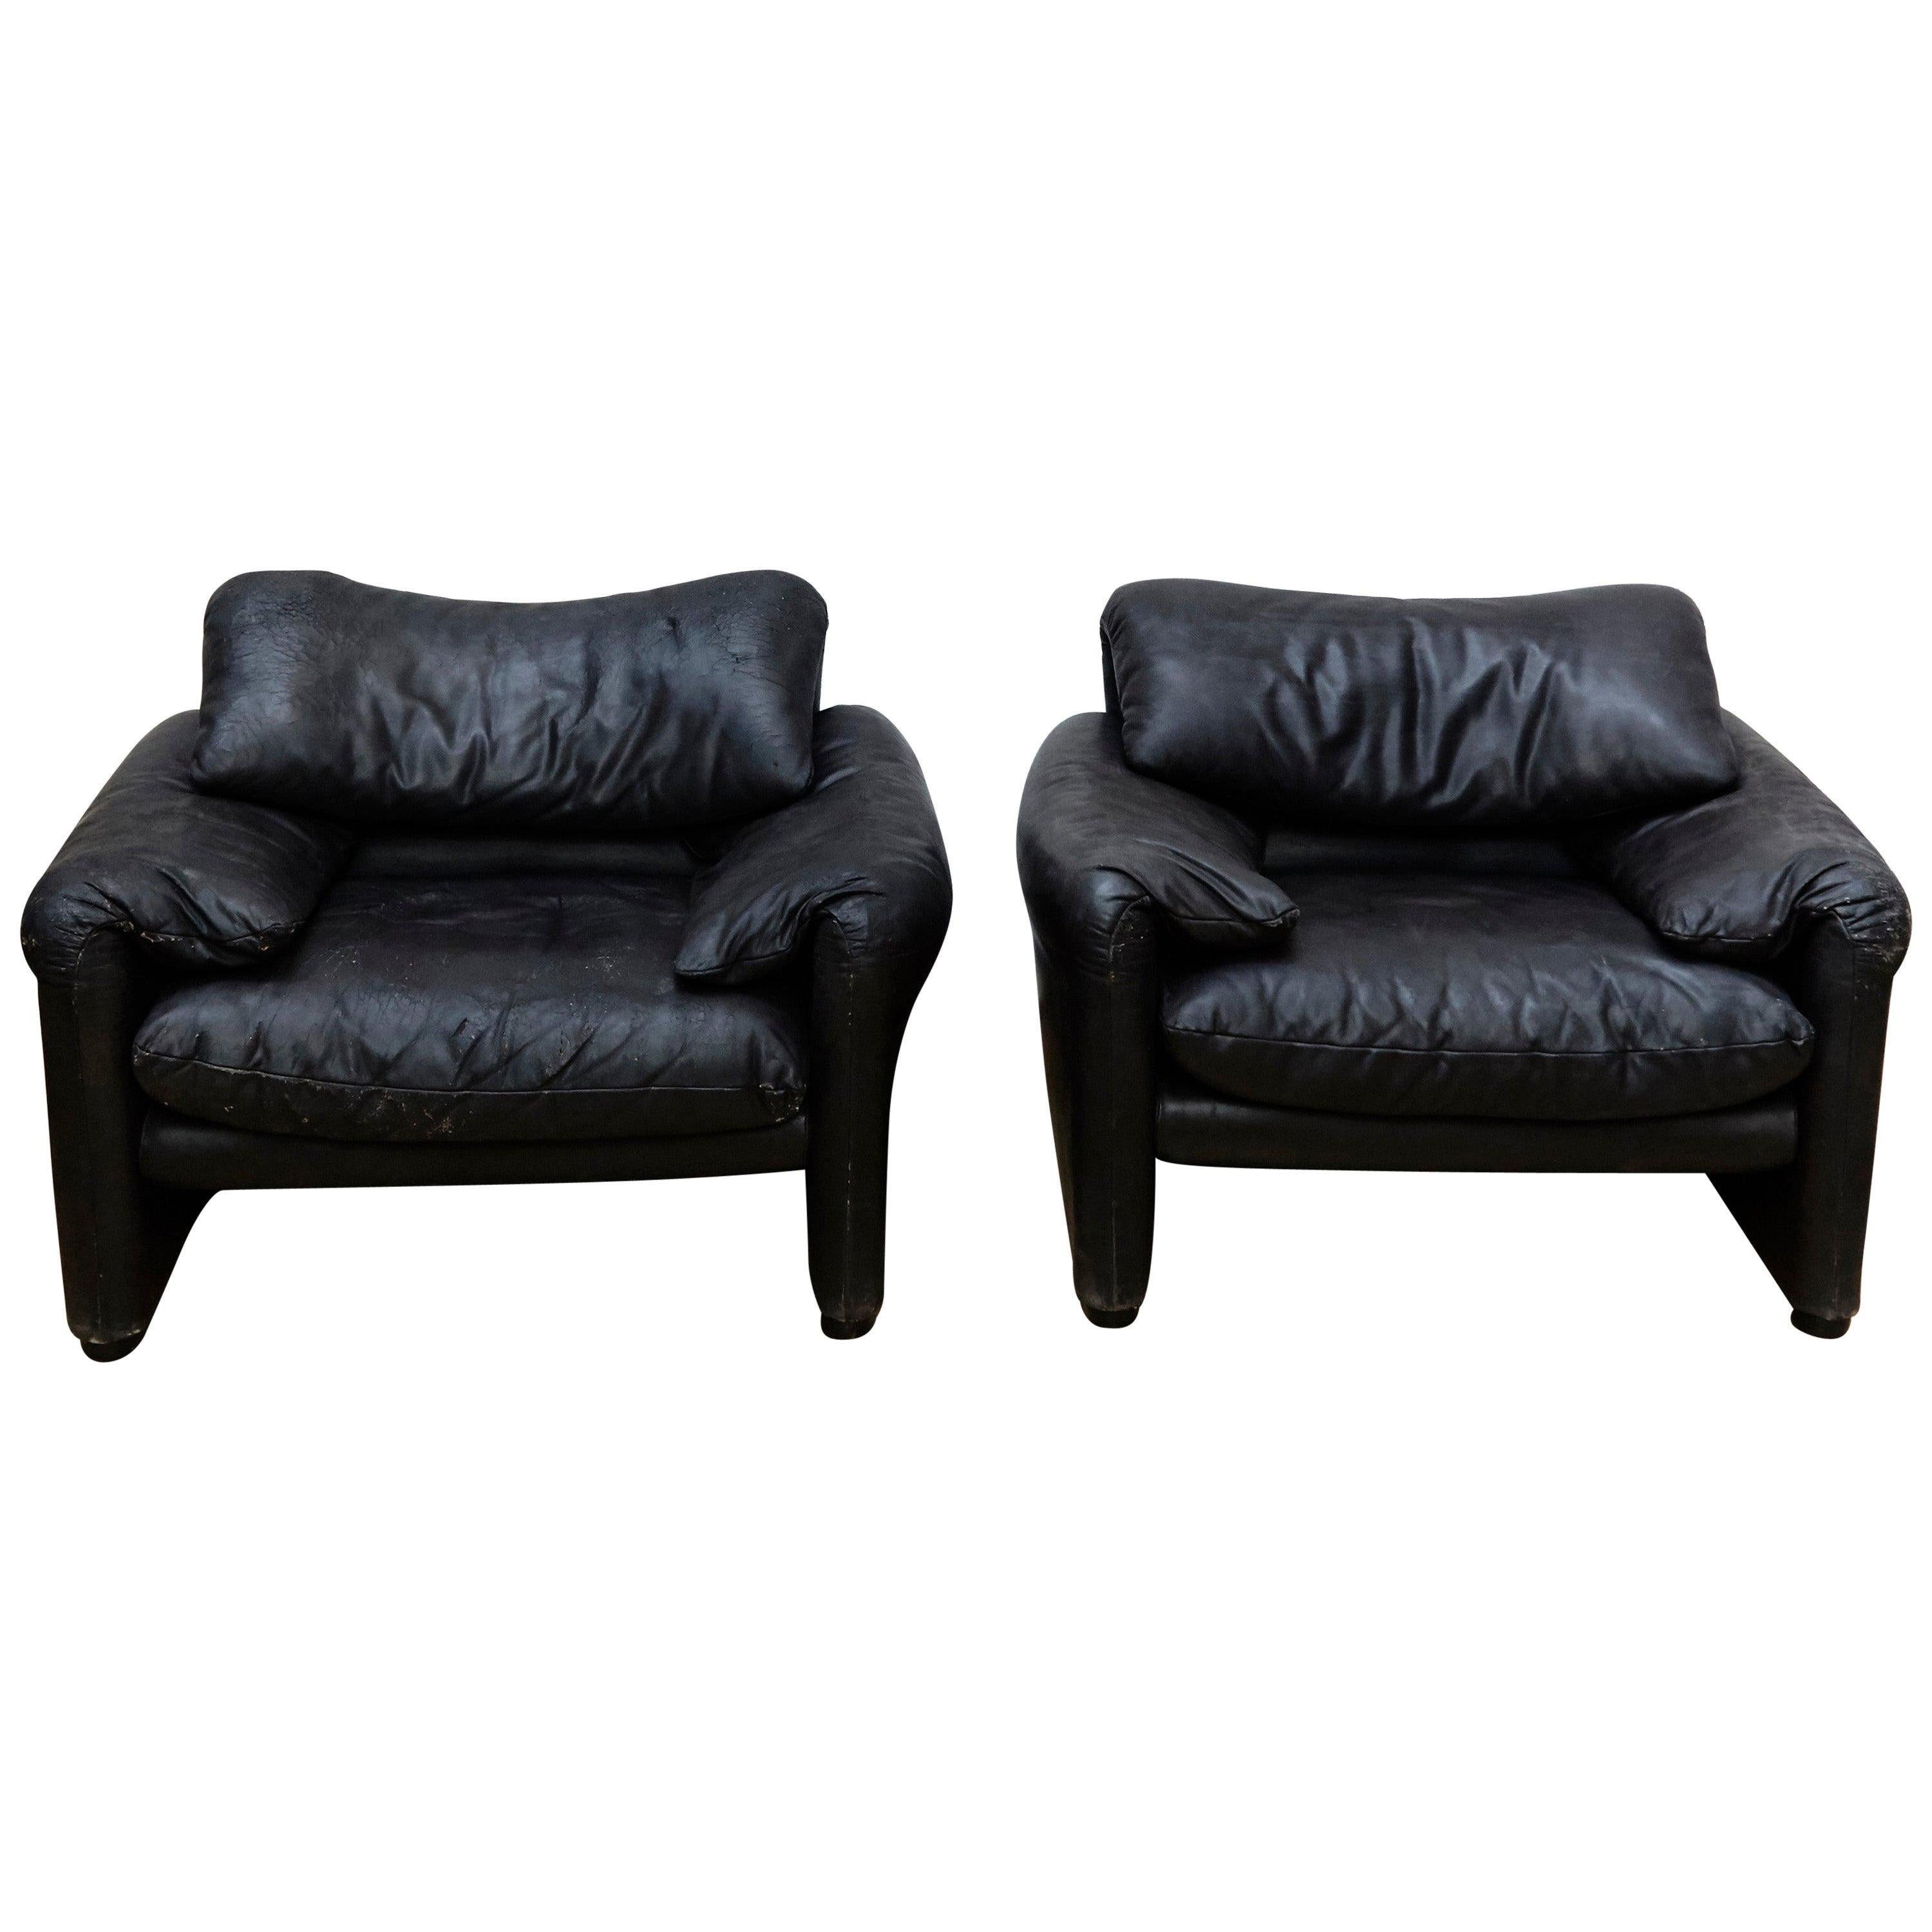 Pair of Black Easy Chairs Maralunga by Vico Magistretti by Cassina